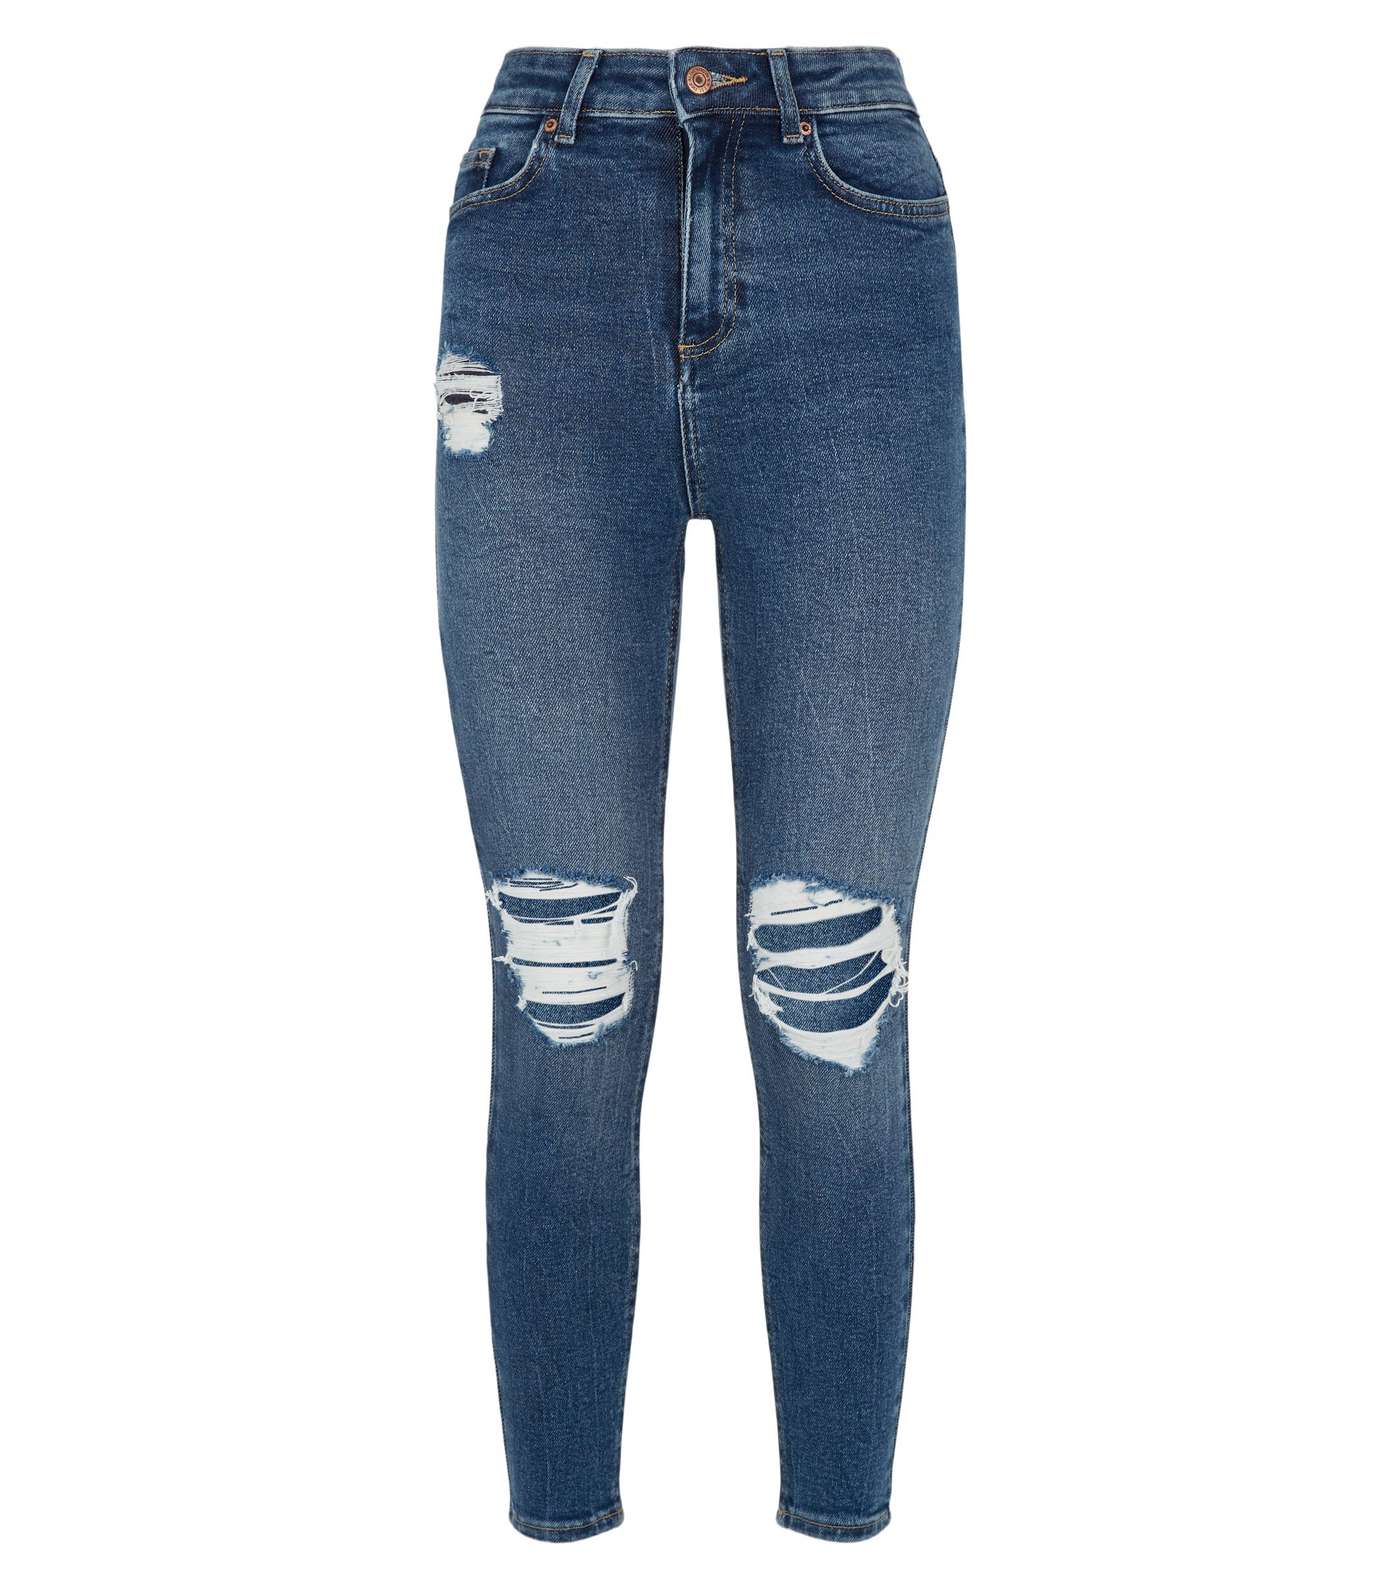 Petite Blue Ripped High Waist Super Skinny Jeans Image 4